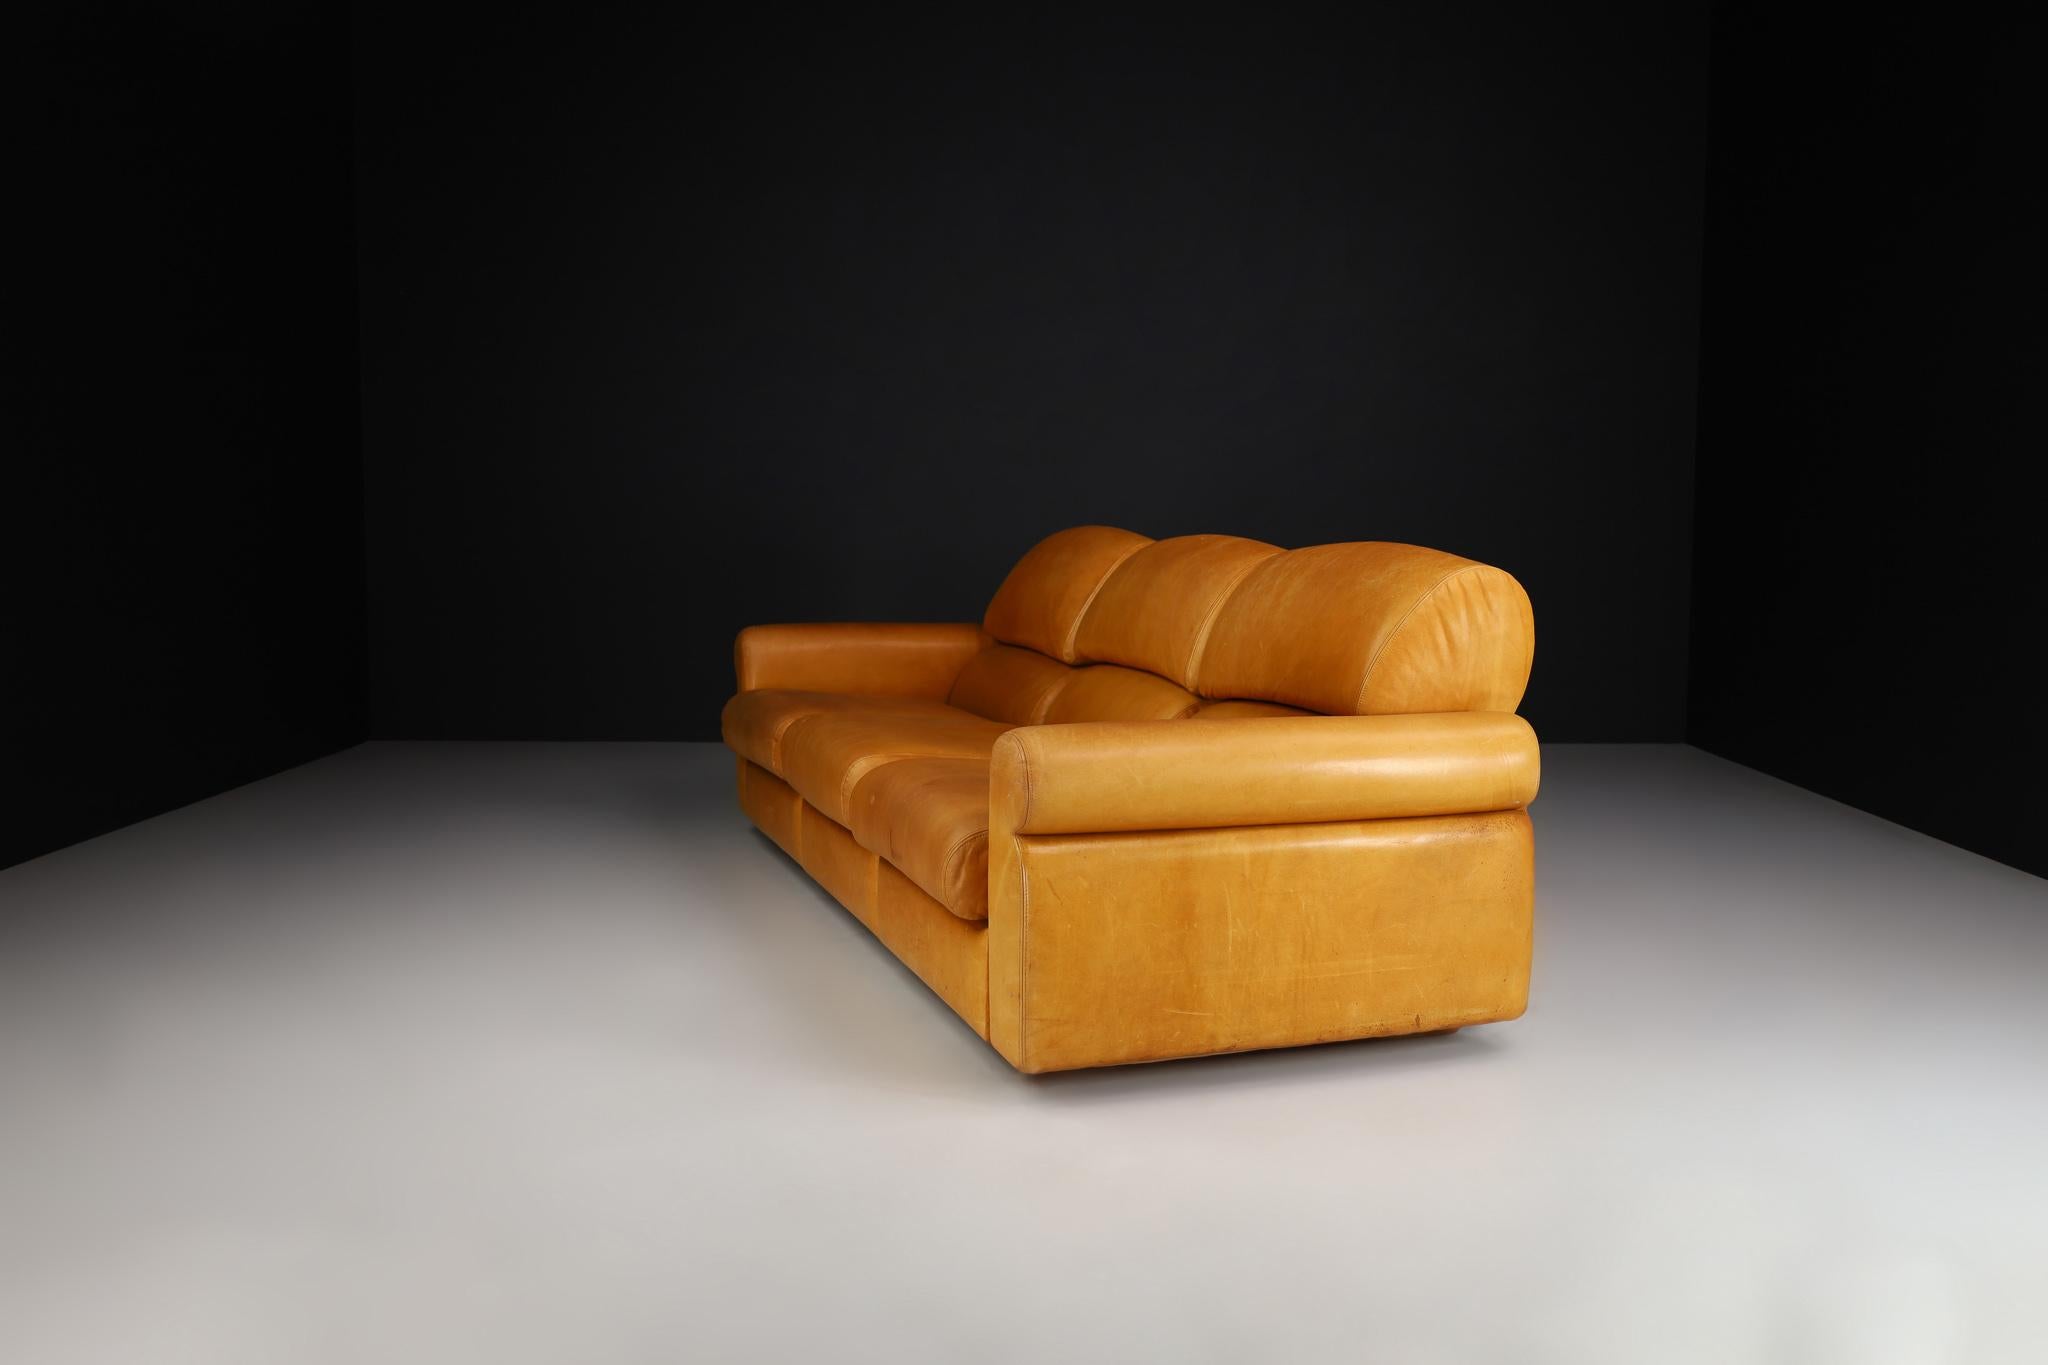 Large Mid-Century Modern Lounge Sofa in Cognac Leather, Italy 1960s For Sale 1